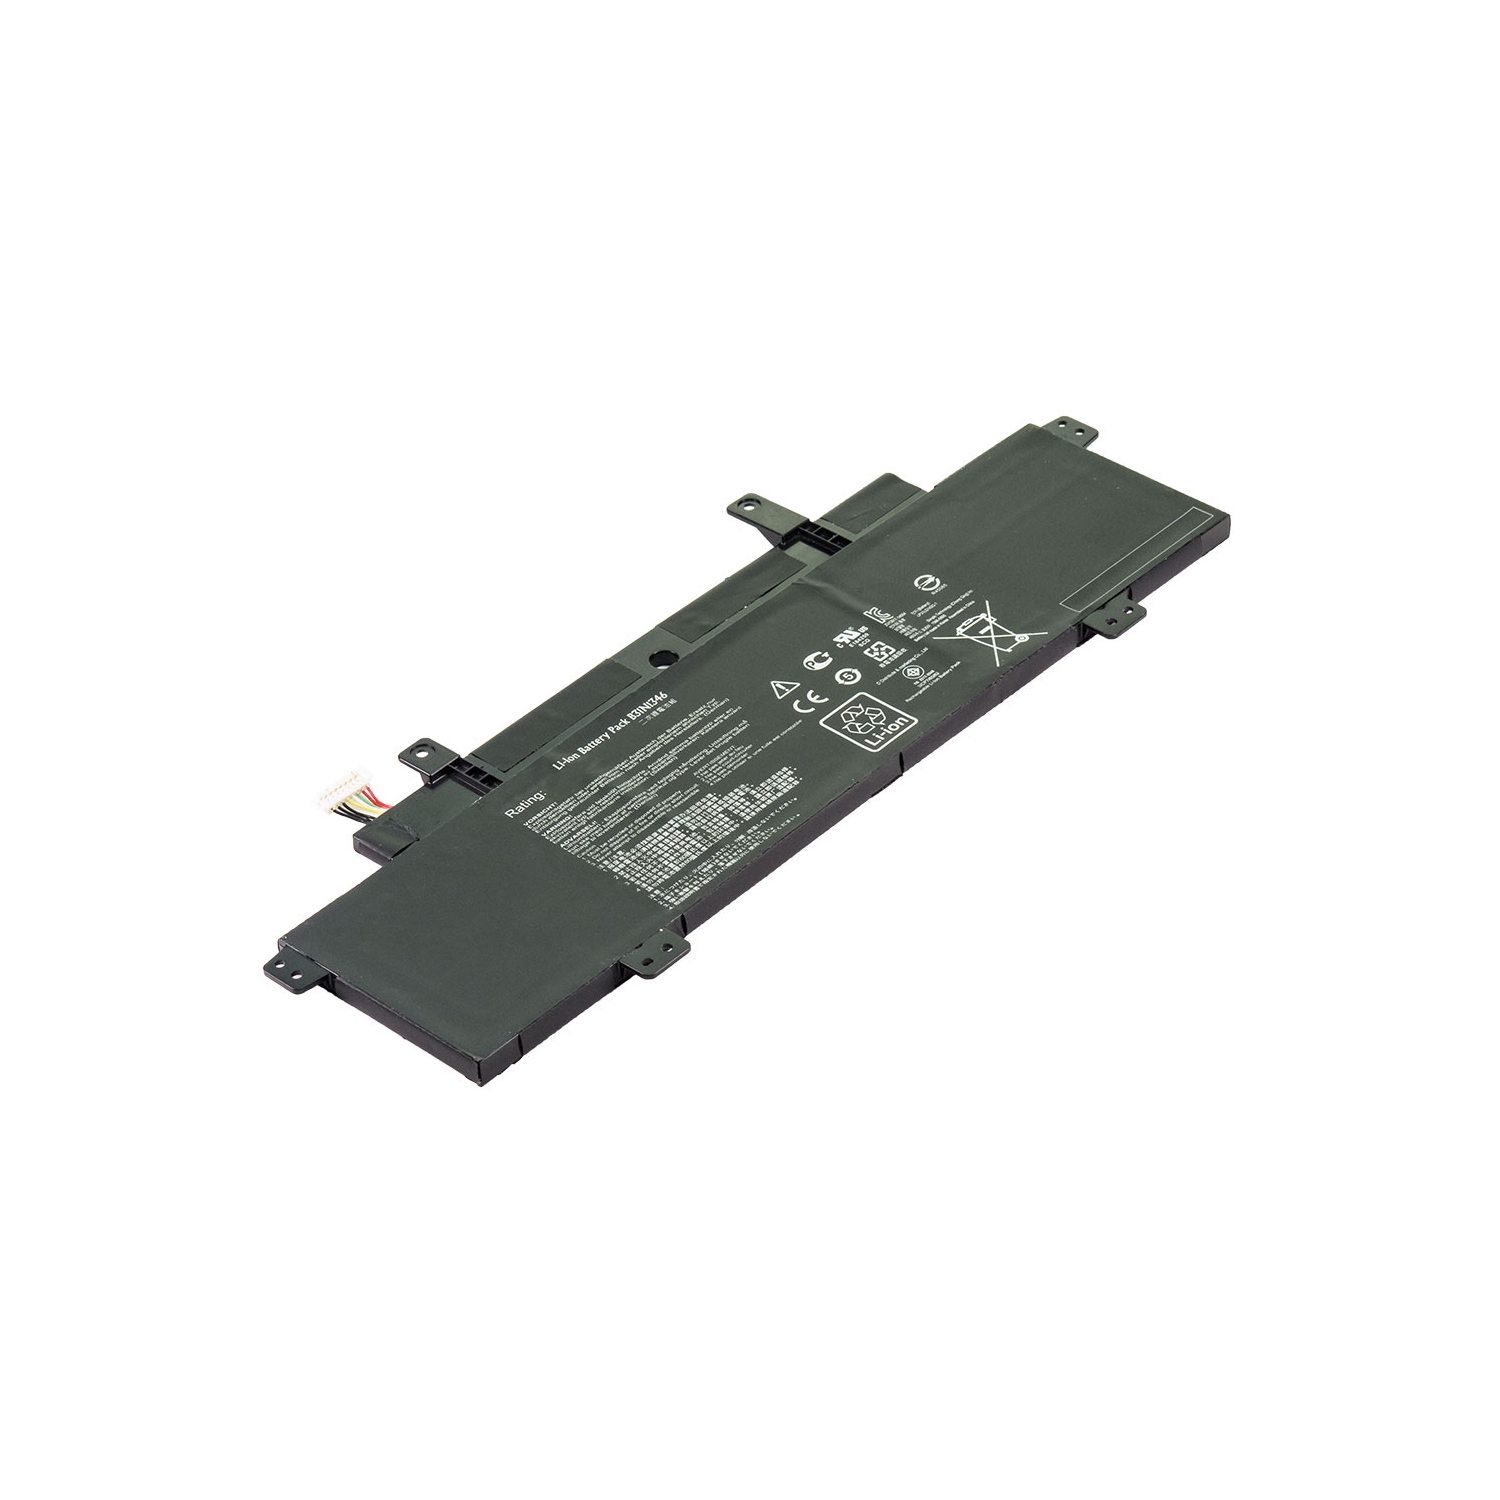 Laptop Battery Replacement for Asus Chromebook 13 C300MA, B31N1346, B31NI346